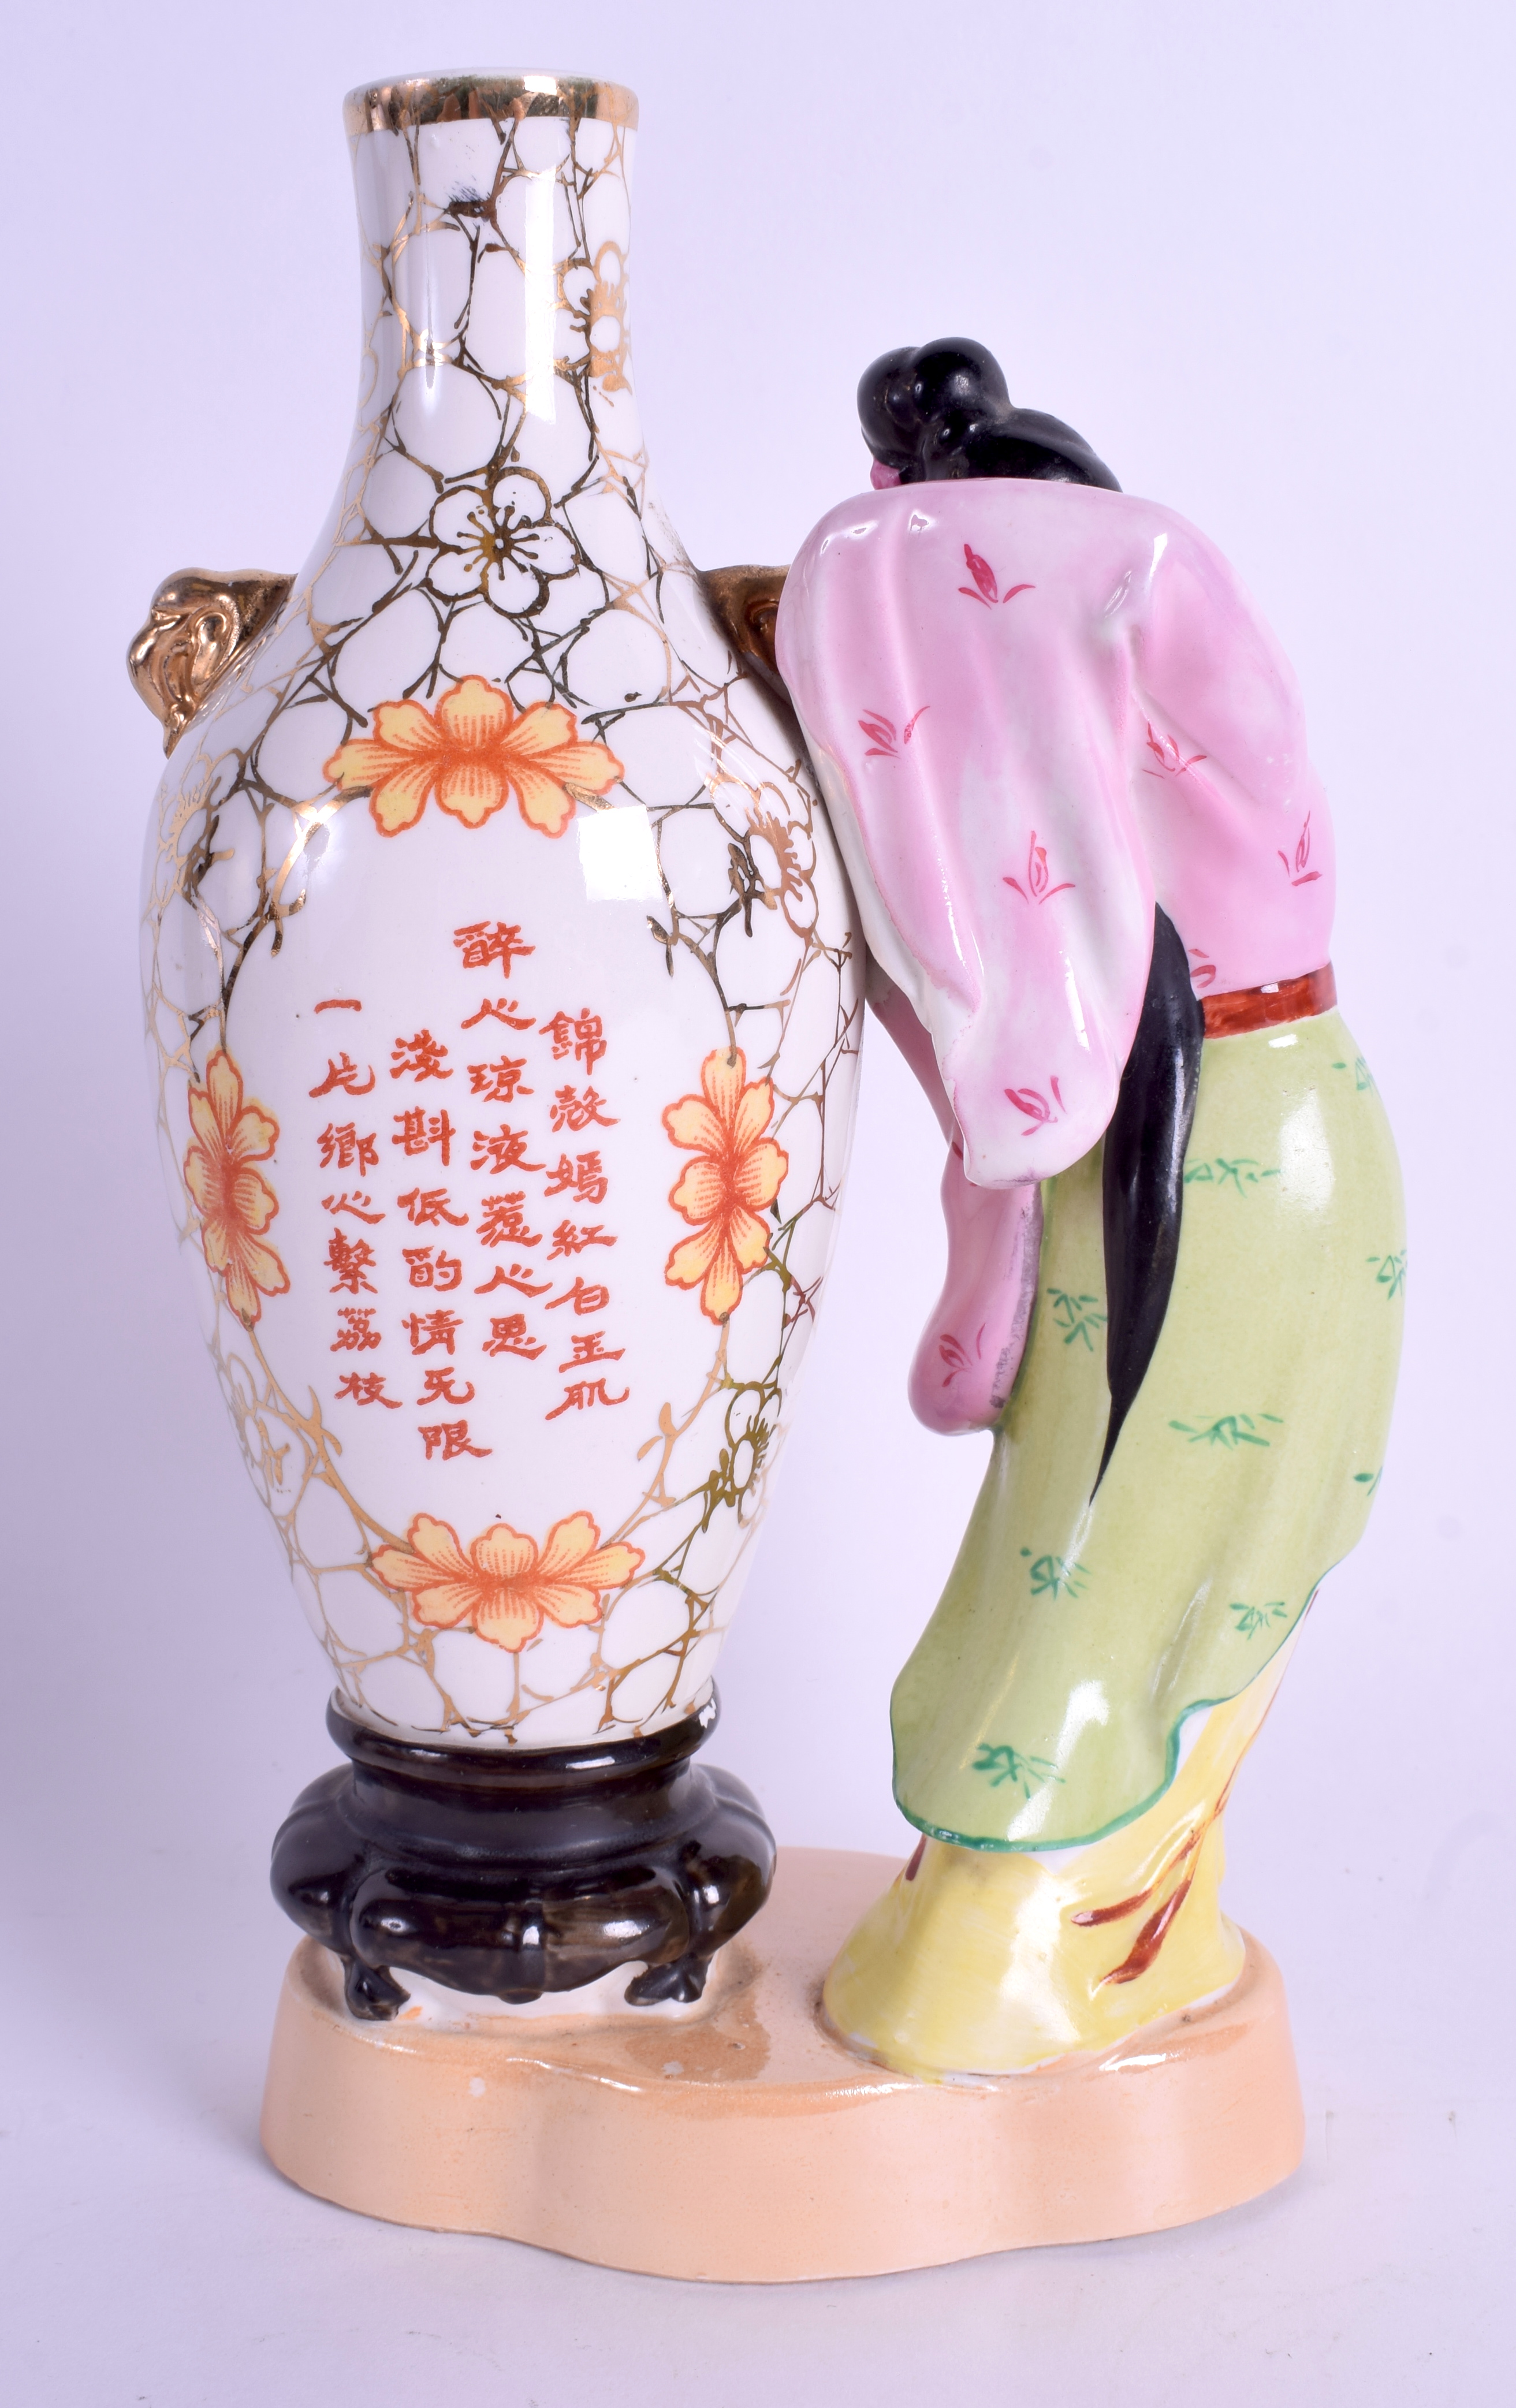 A RARE 1950S CHINESE ADVERTISING FIGURE The Swatow Brewery, China. 23.5 cm high. - Image 2 of 3